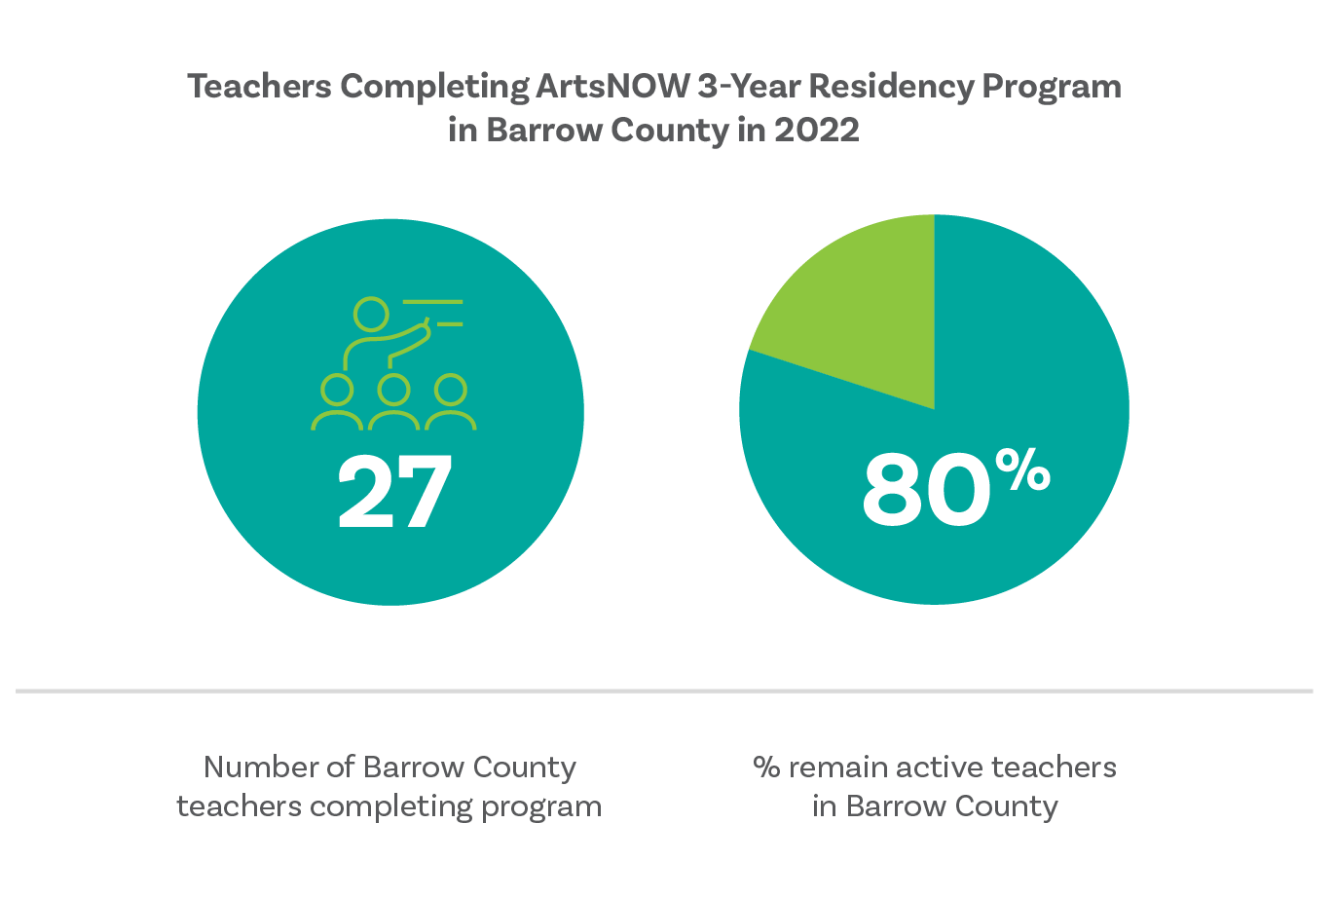 Pie chart showing that 27 Barrow County teachers have completed the ArtsNow three year residency program